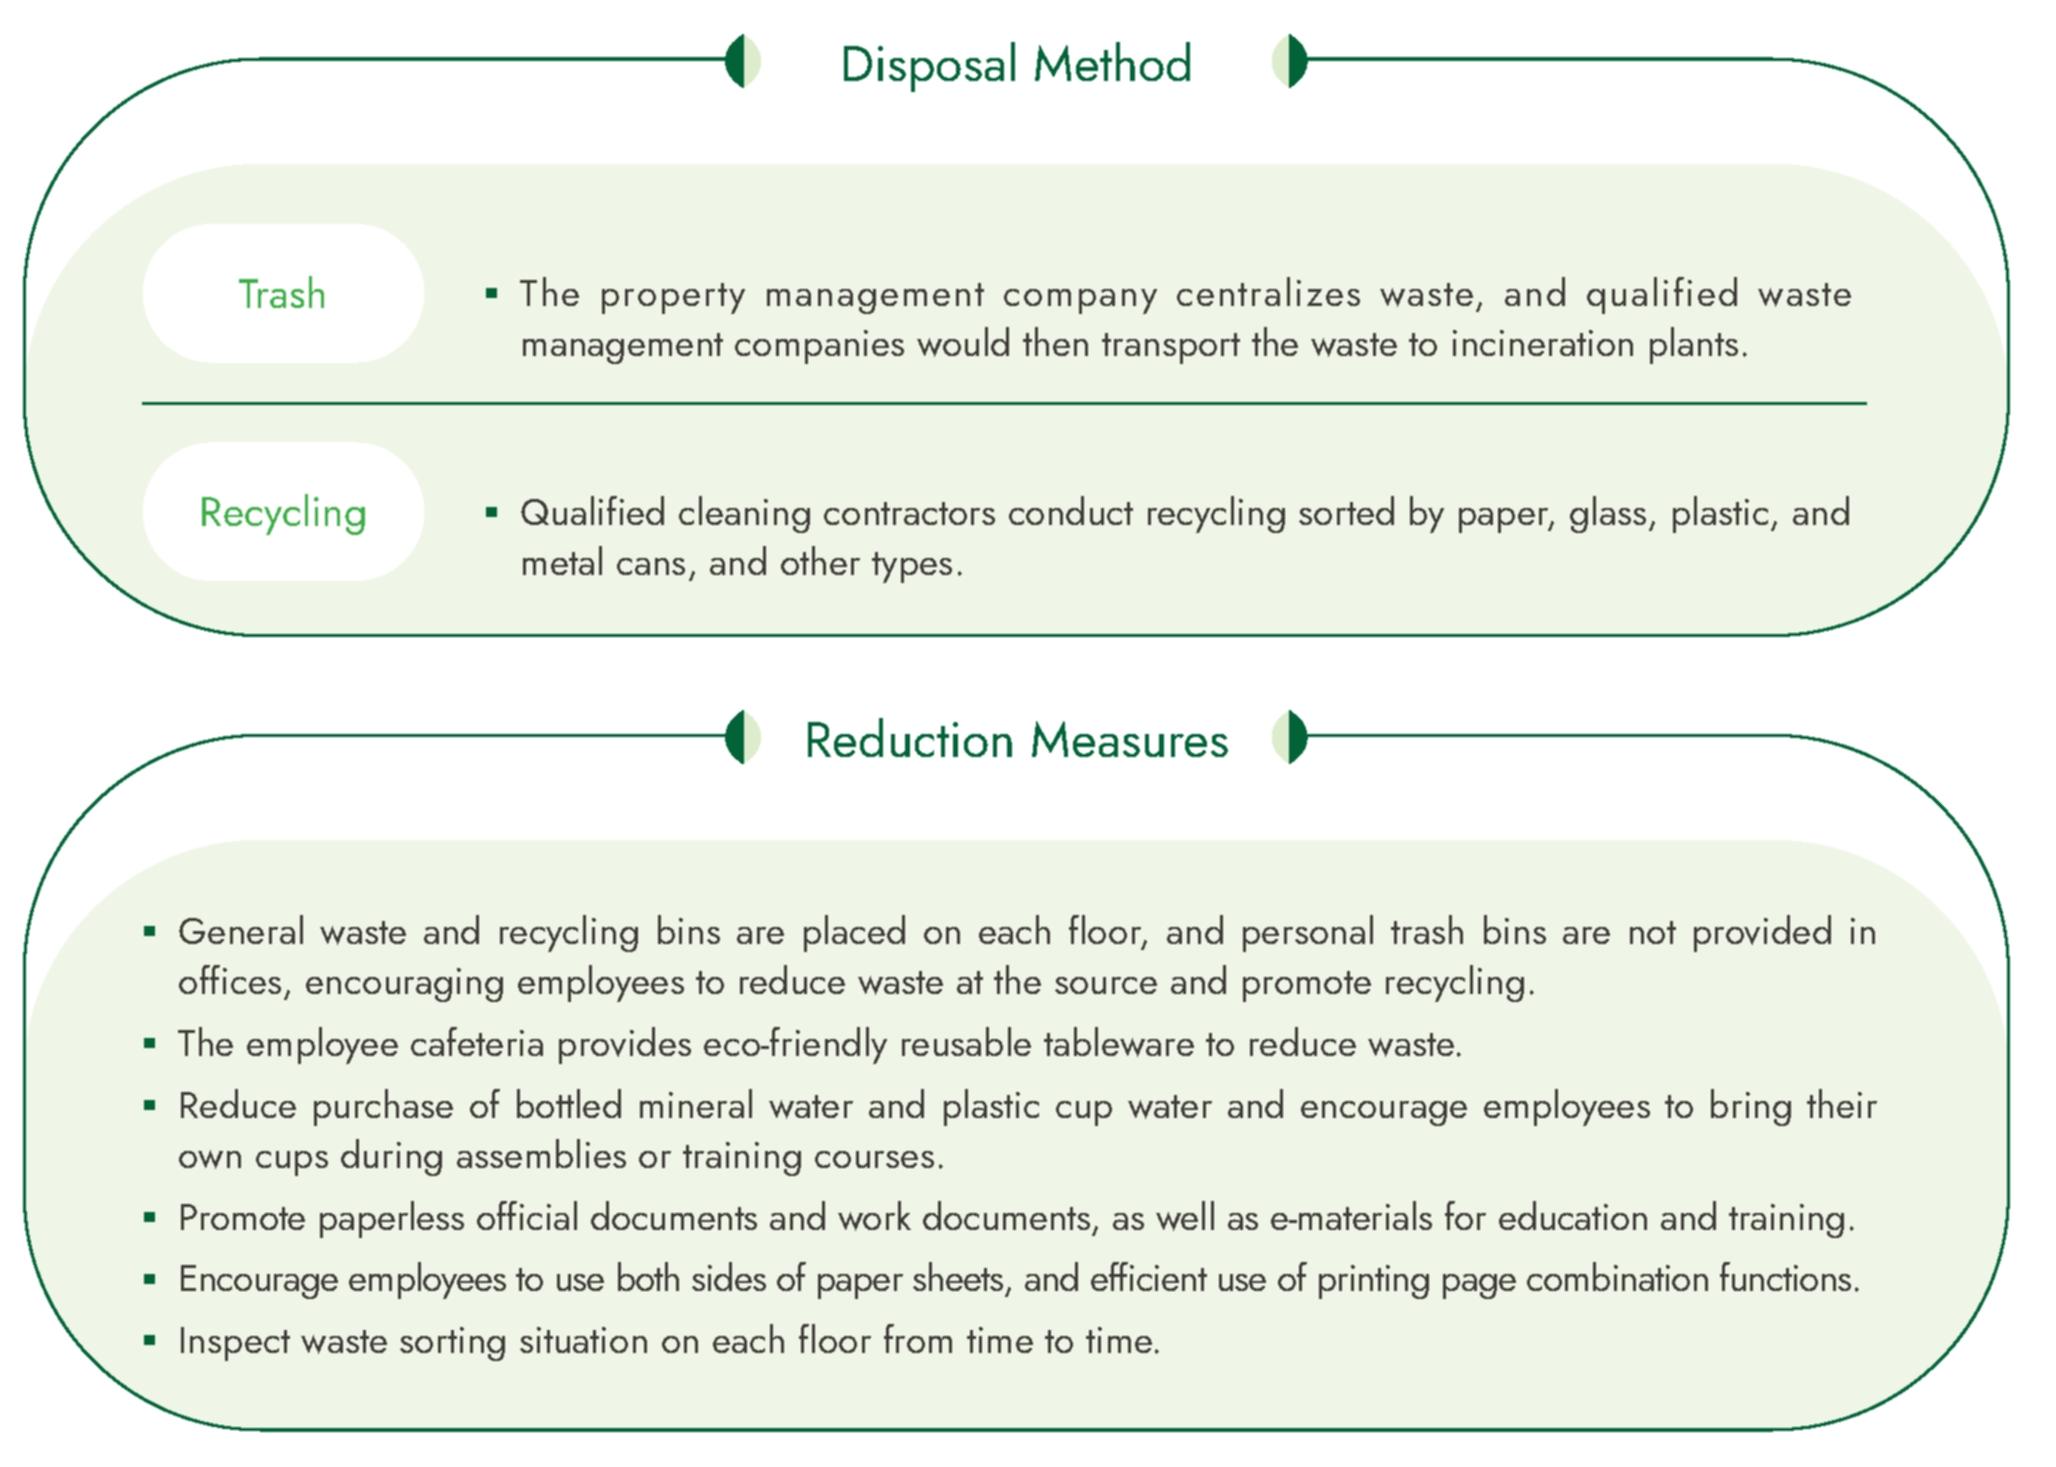 Waste Reduction and Management